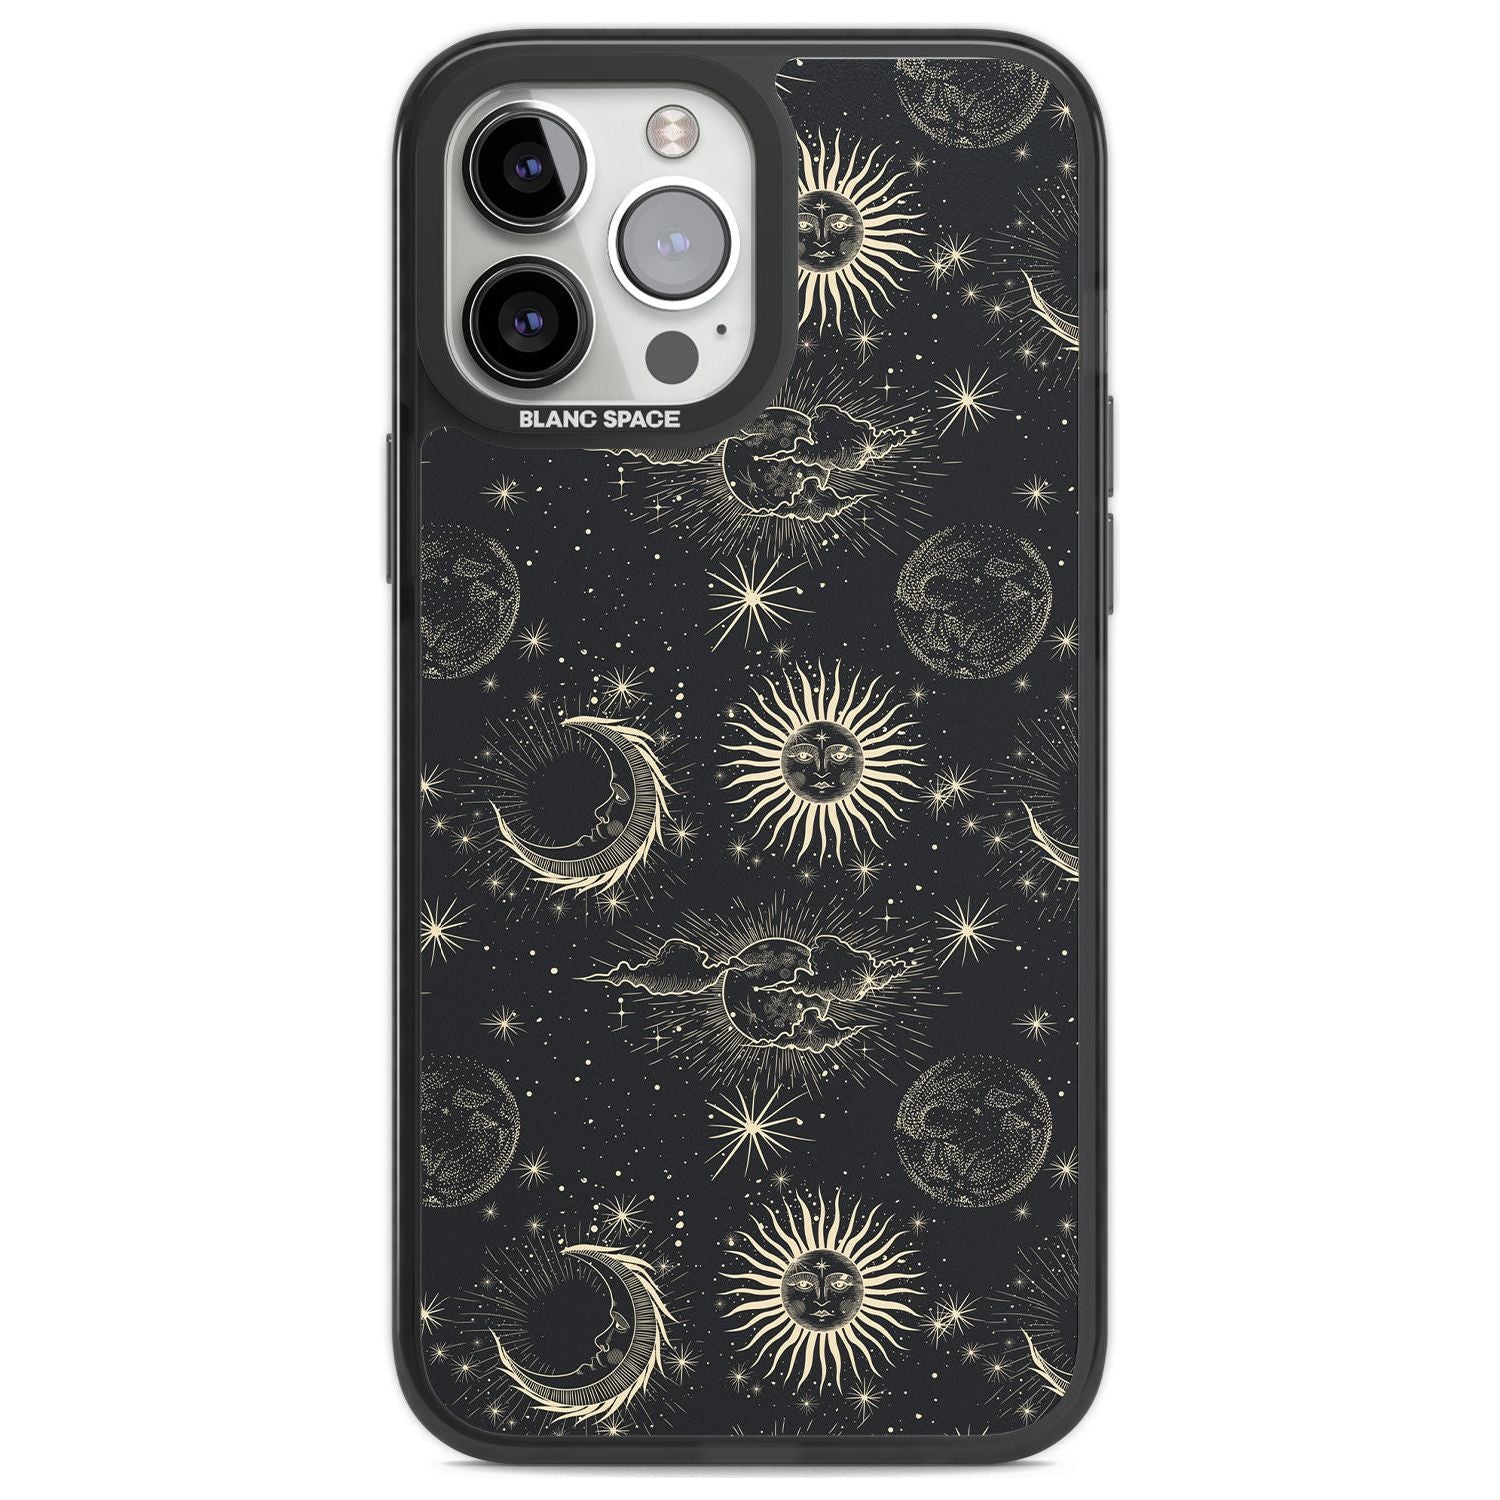 Large Suns, Moons & Clouds Astrological Phone Case iPhone 13 Pro Max / Black Impact Case,iPhone 14 Pro Max / Black Impact Case Blanc Space